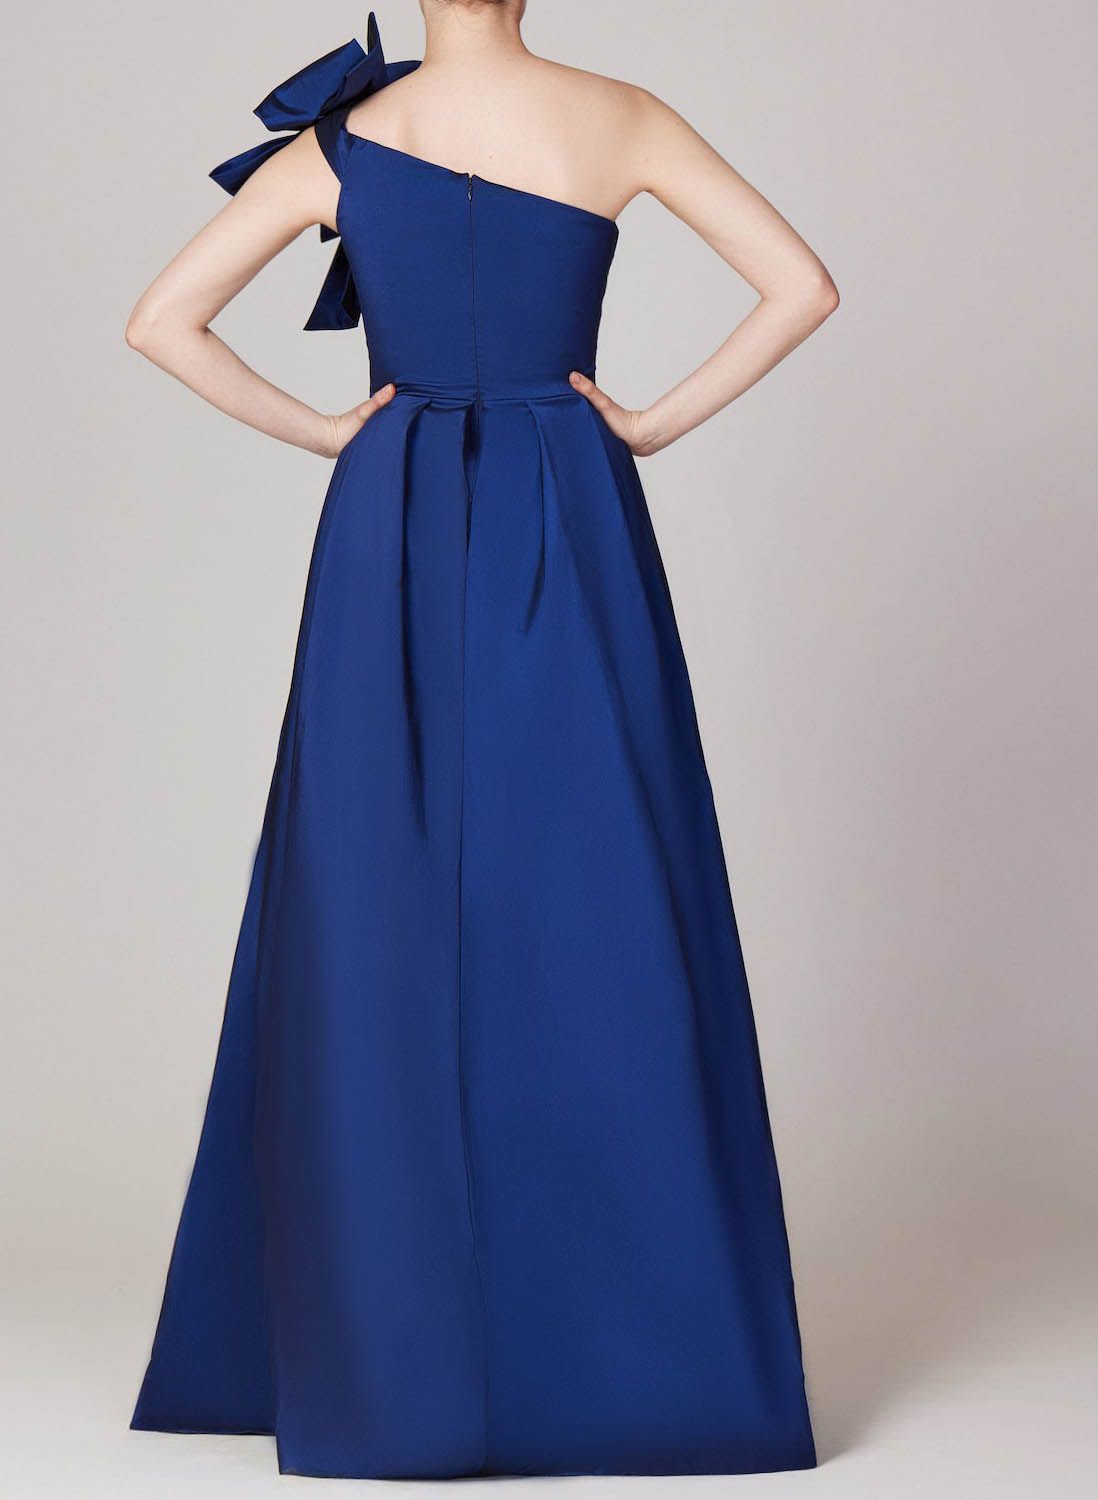 One-Shoulder Simple A-Line Evening Dresses With Bow(s)